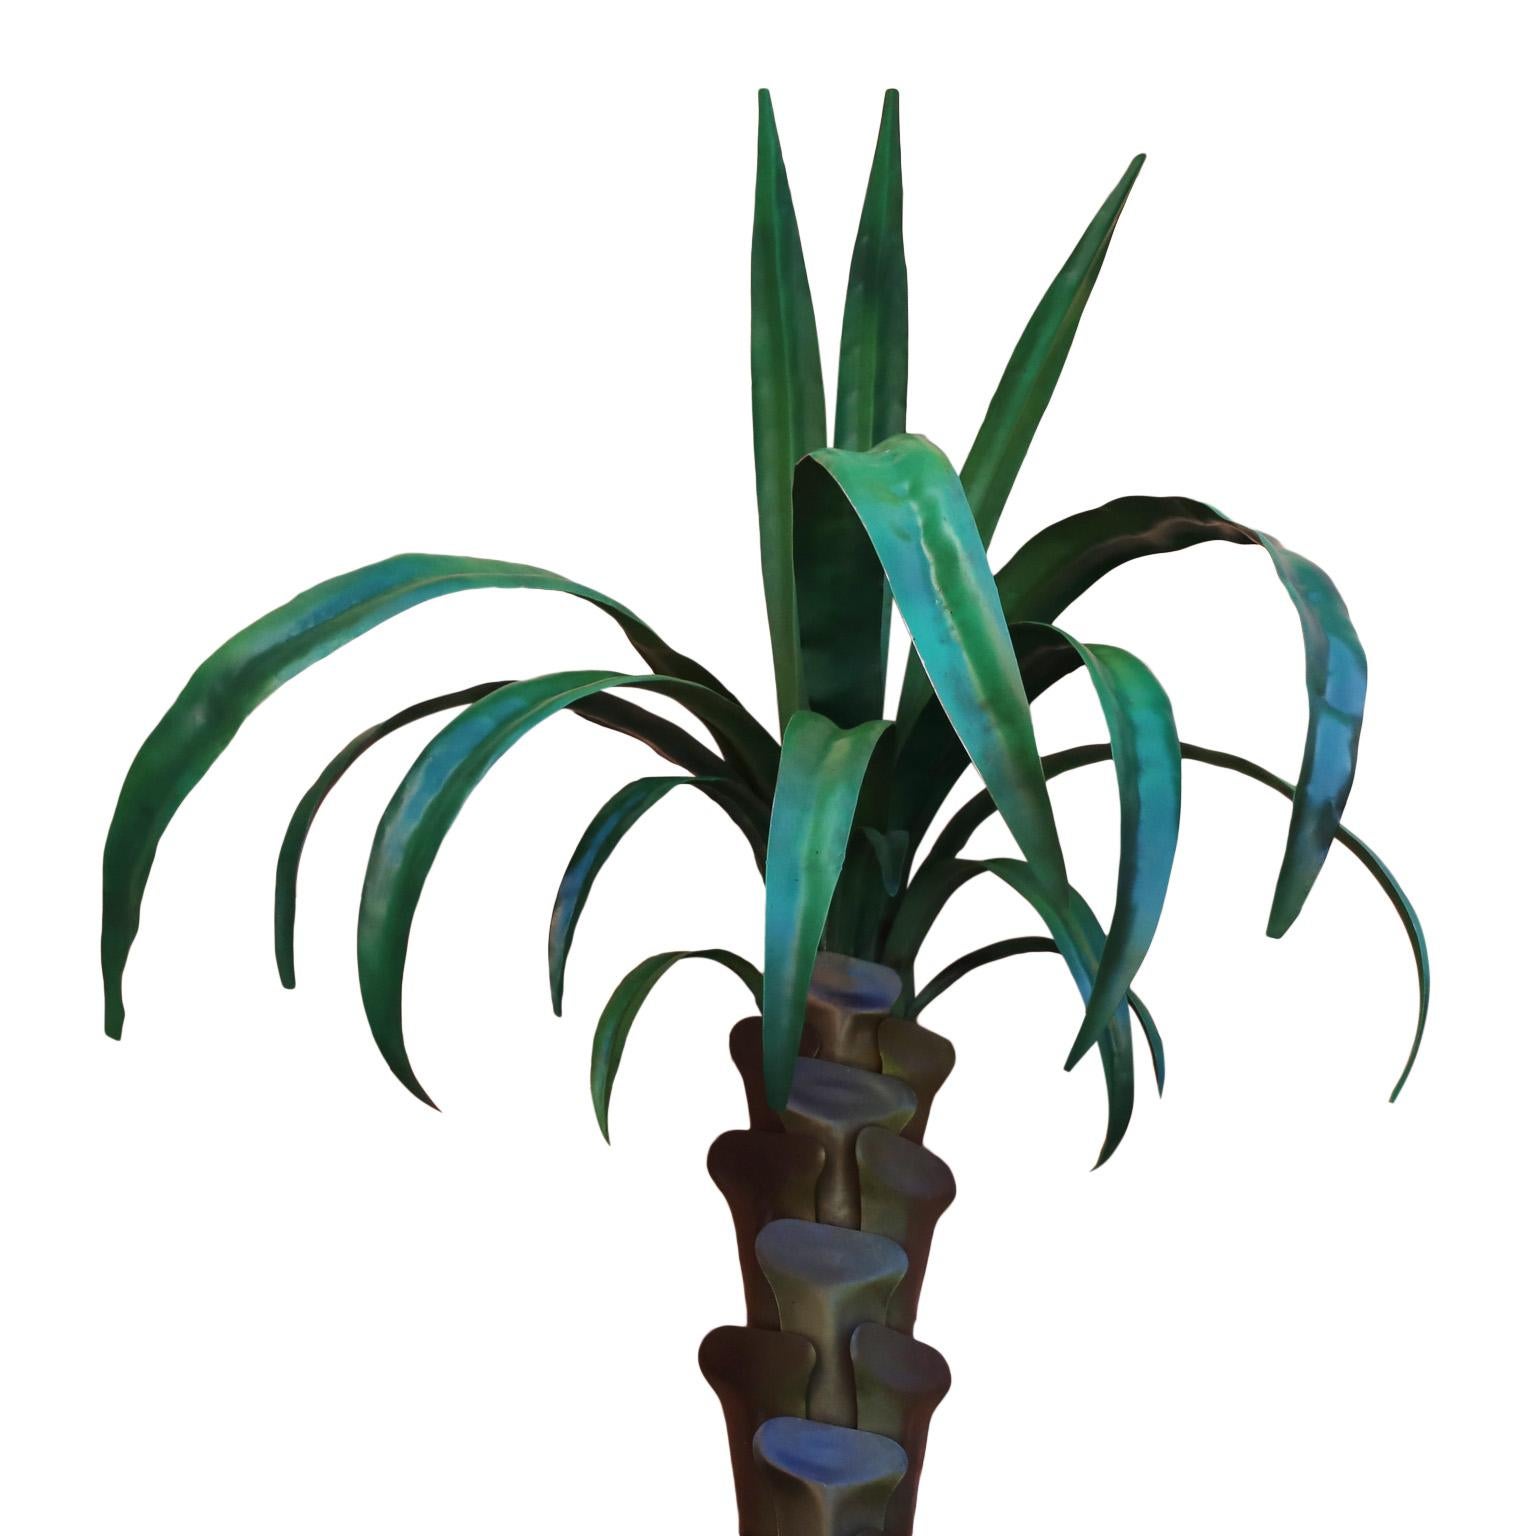 Standout life sized pair of vintage tole or painted metal wall mounted palm tree sculptures with plenty of decorative appeal.